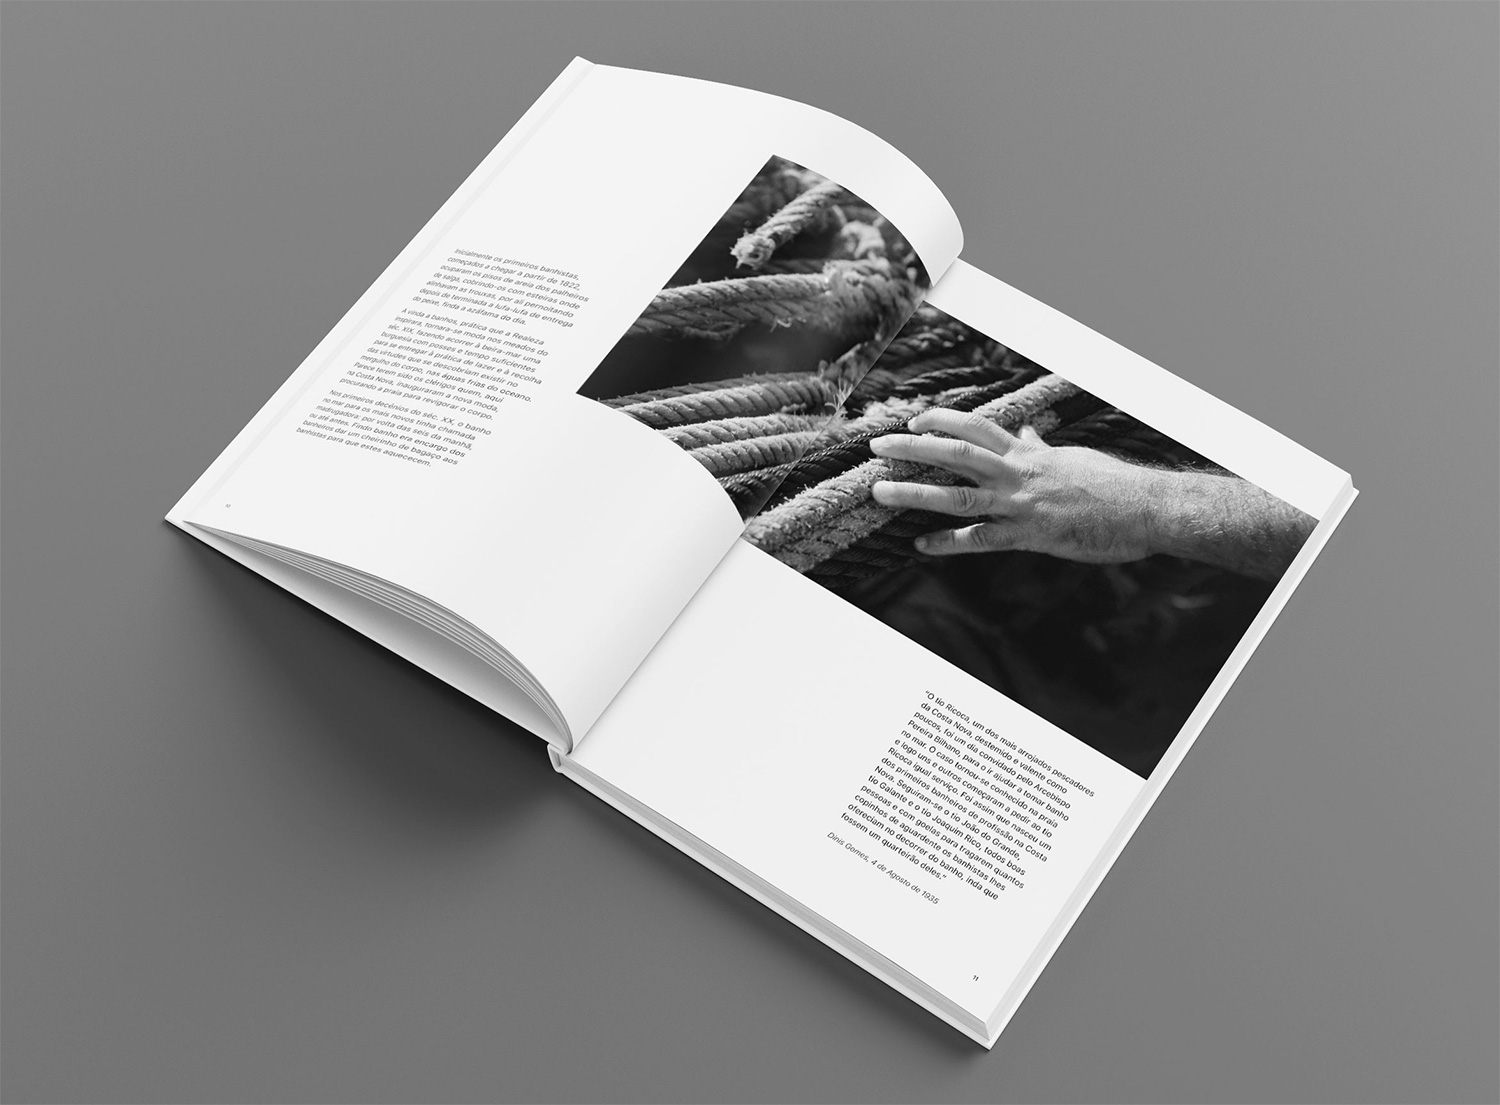 Spread of the book with text and a photo of a fisherman's hands.